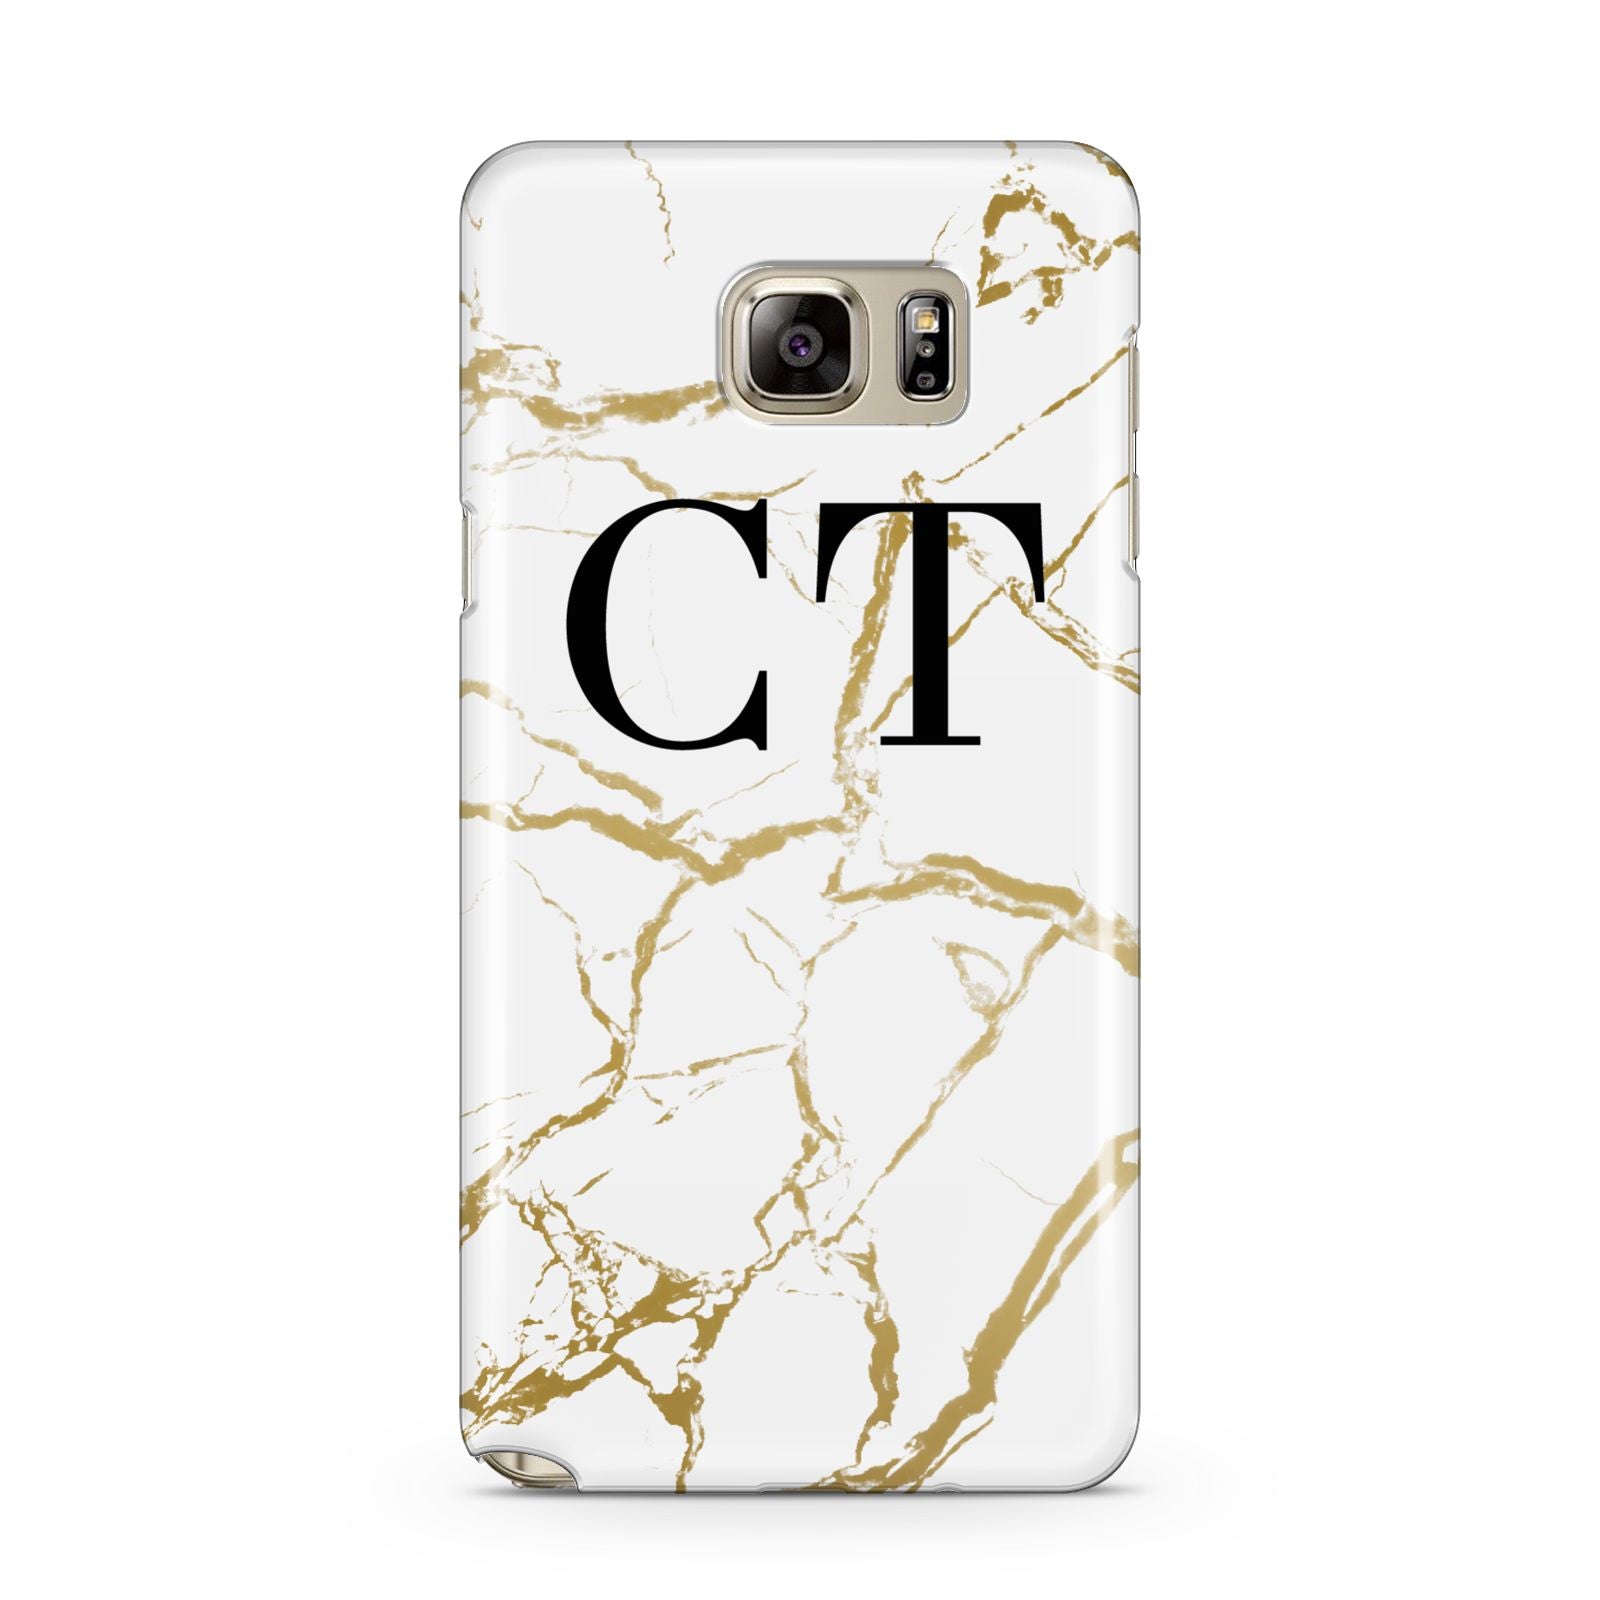 Personalised Gold Veins White Marble Monogram Samsung Galaxy Note 5 Case